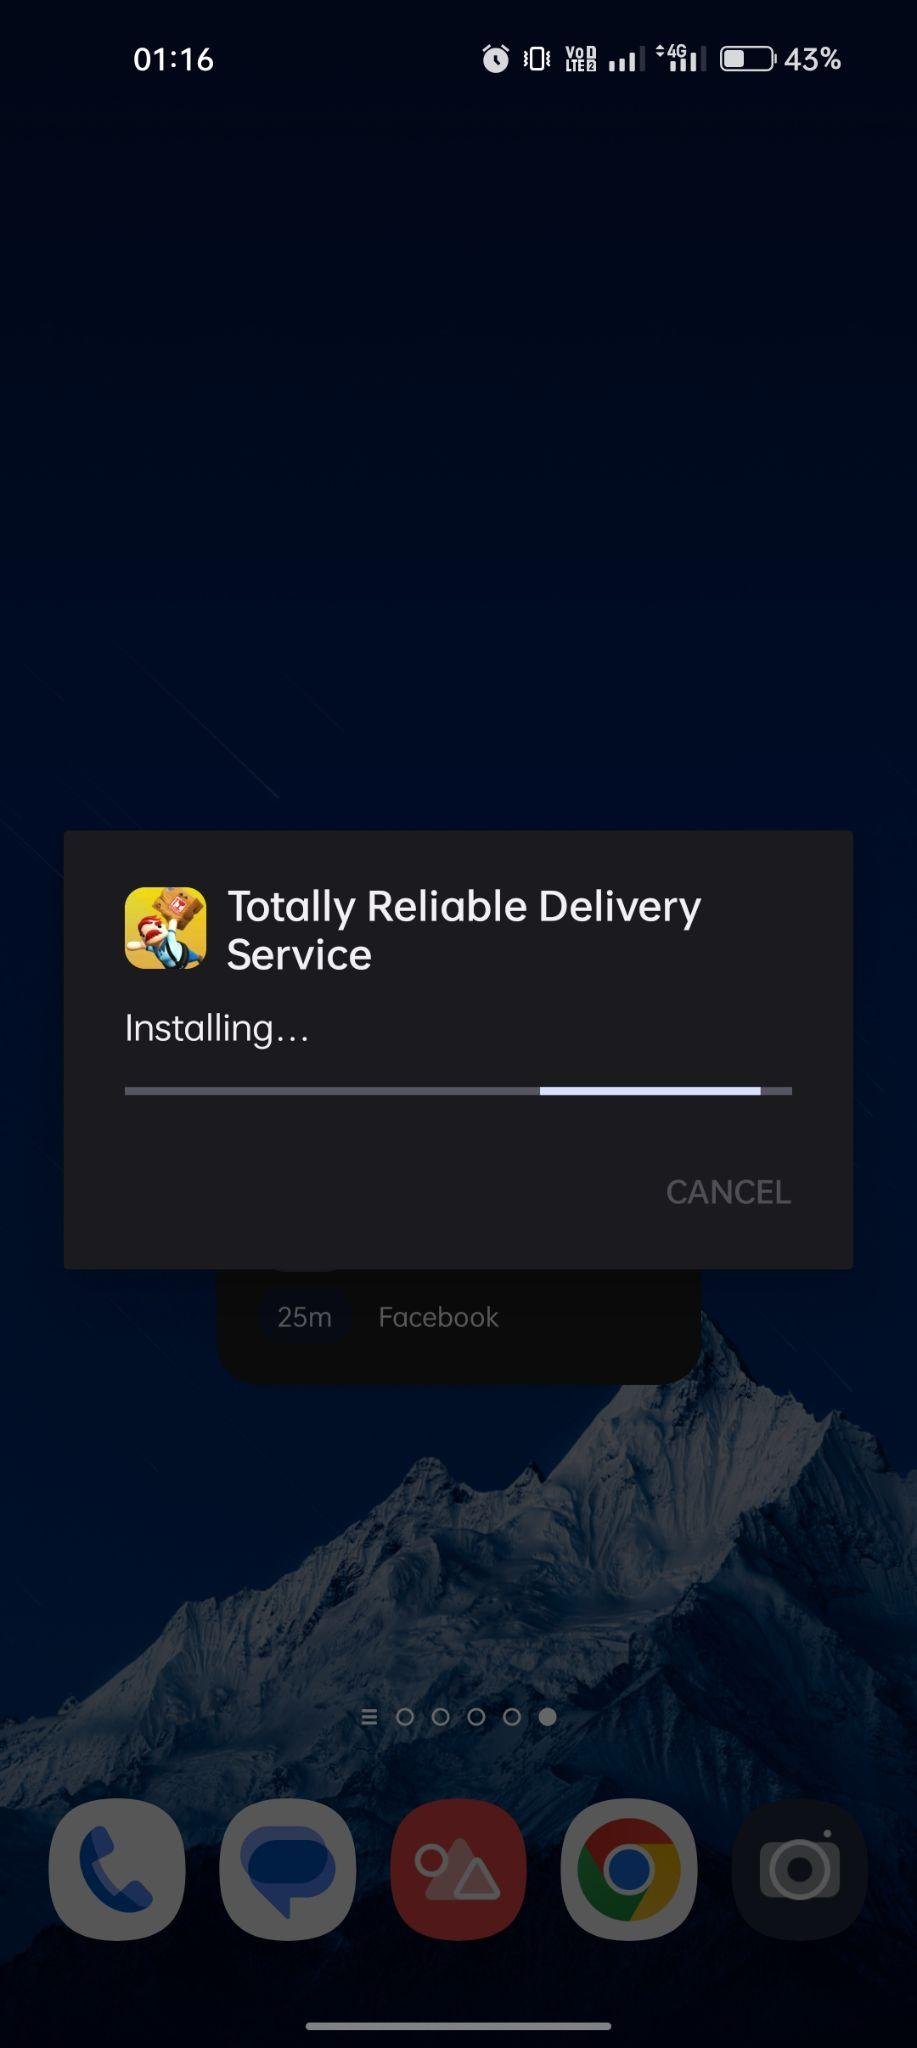 Totally Reliable Delivery Service apk installing 